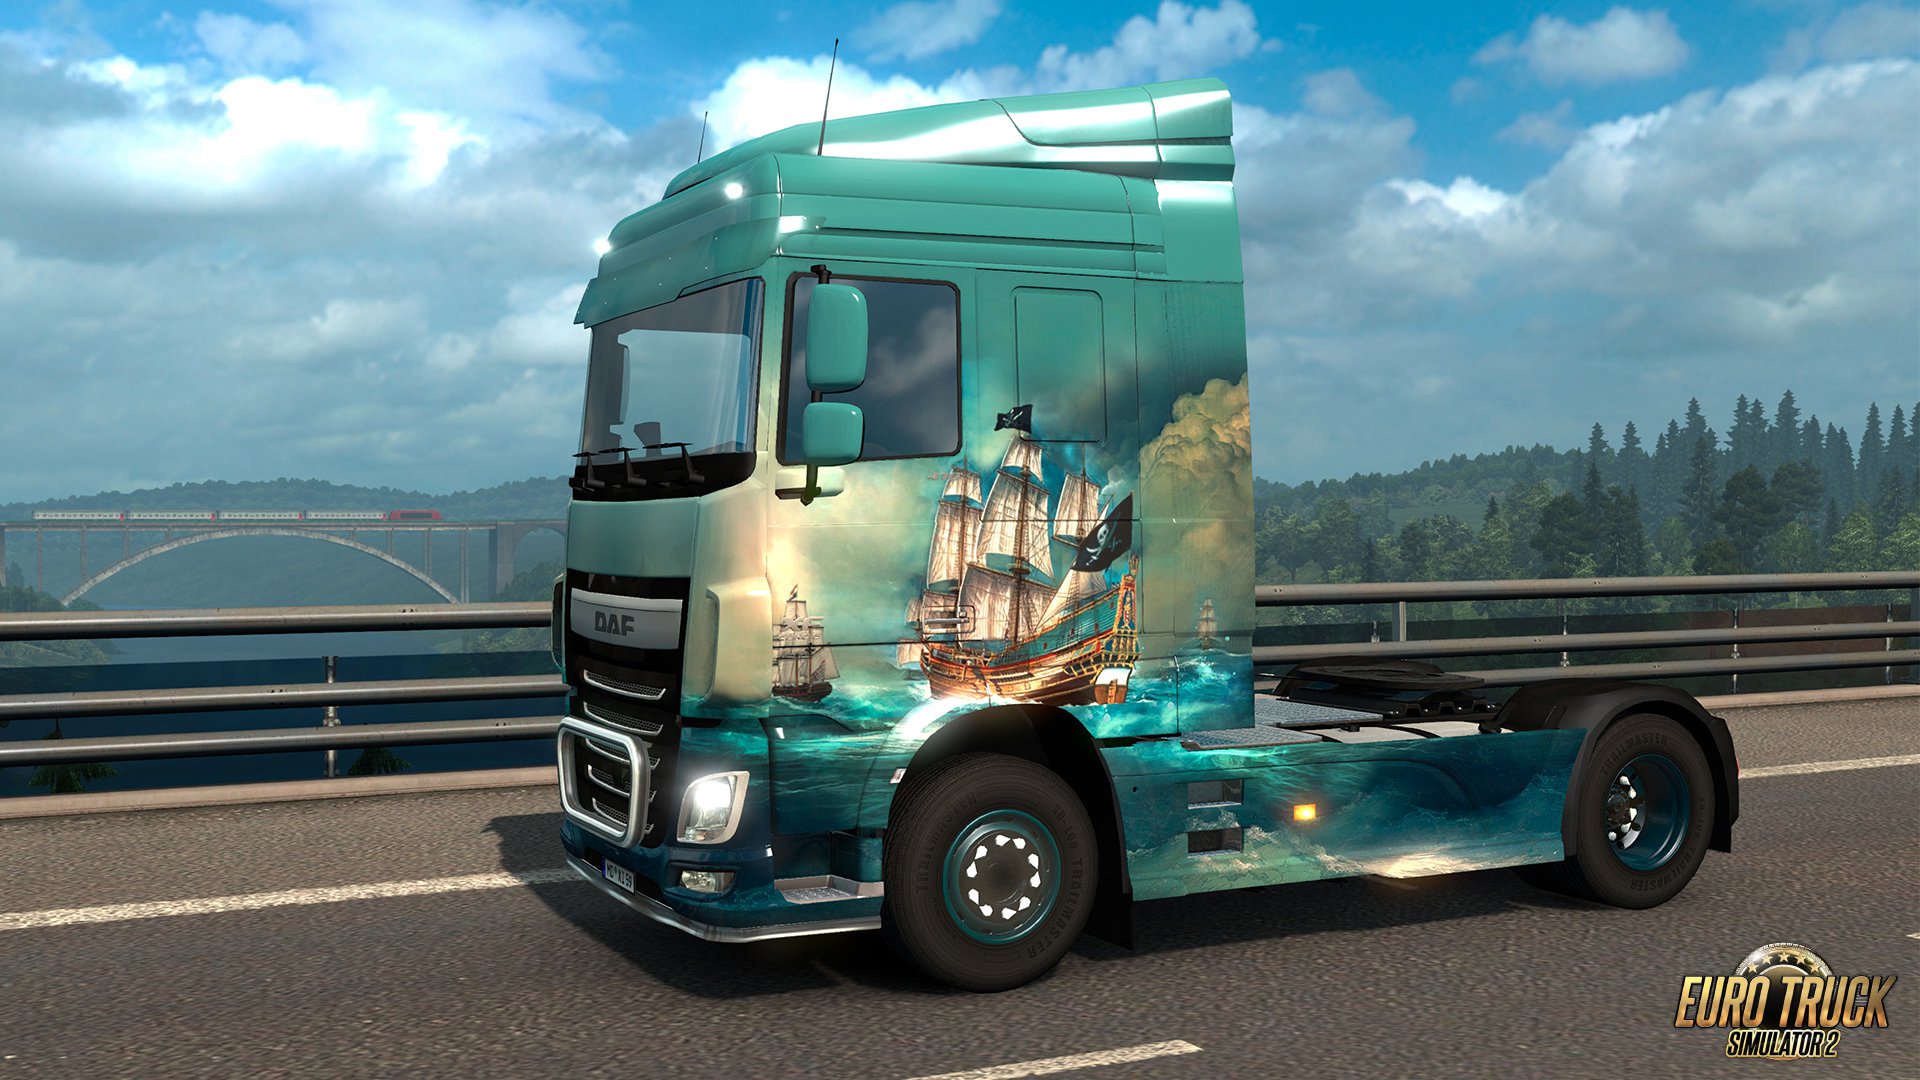 Euro Truck Simulátor 2 Pirate Paint Jobs Pack 2